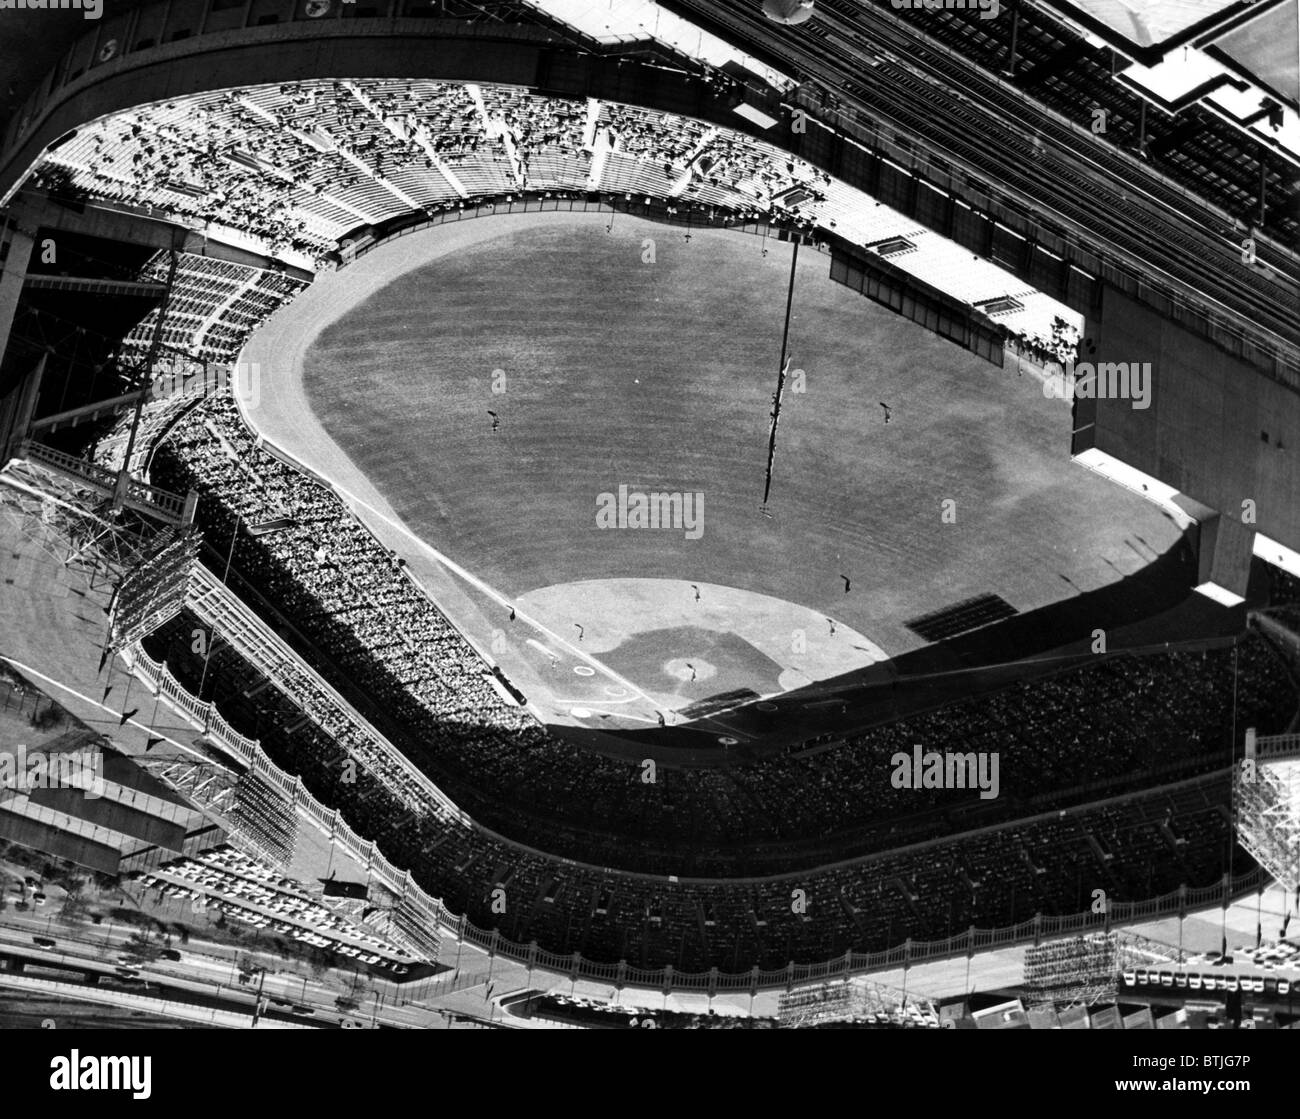 Yankee Stadium on labor day. 20,000 fans are watching the Yankees play the Baltimore Orioles, New York, September 6, 1965. CSU A Stock Photo